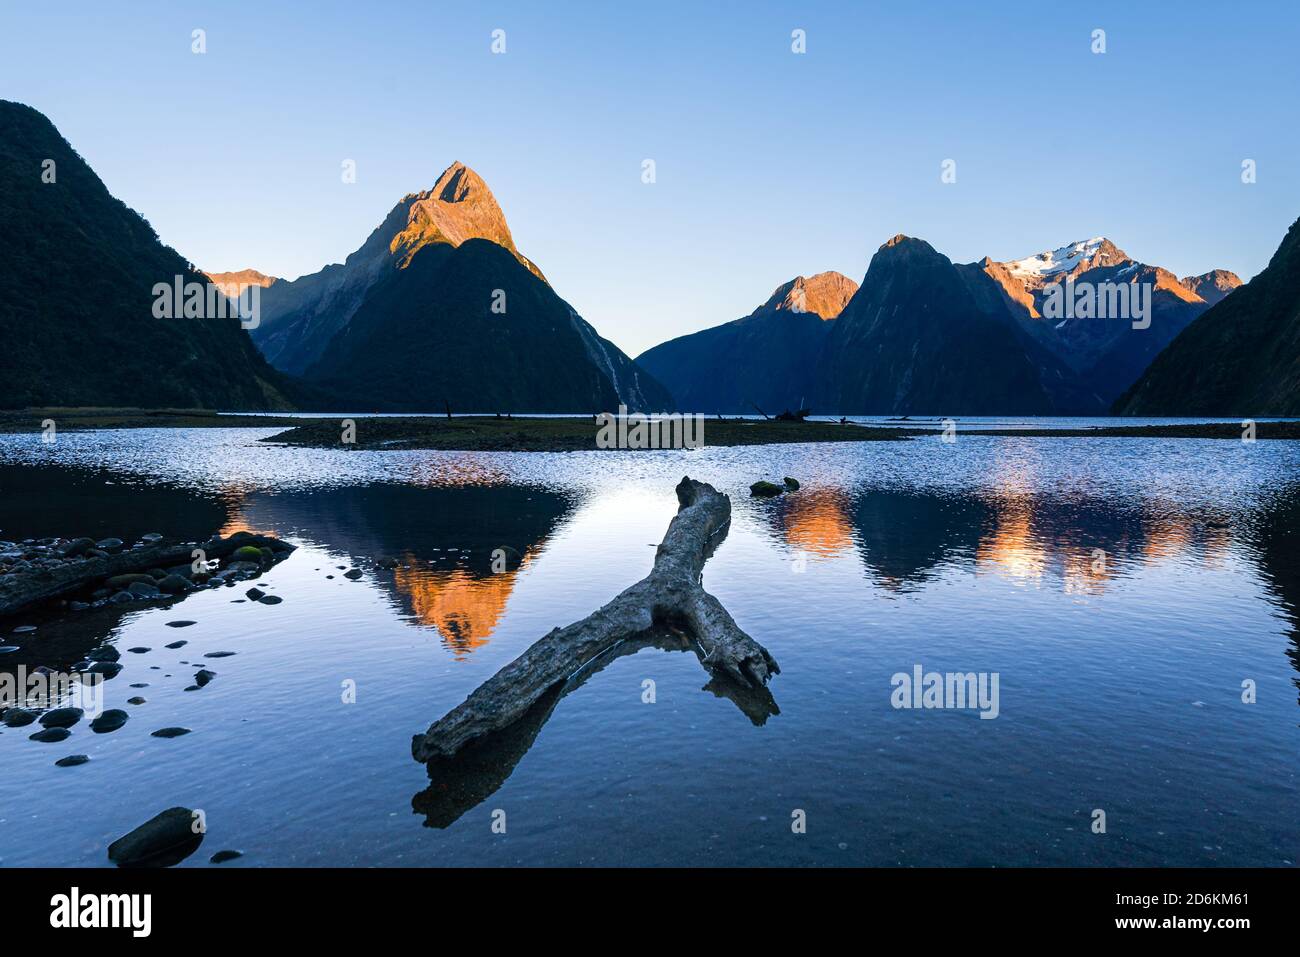 Sunrise in the fiord of Milford Sound with Mitre Peak in Fiordland National Park, New Zealand Stock Photo